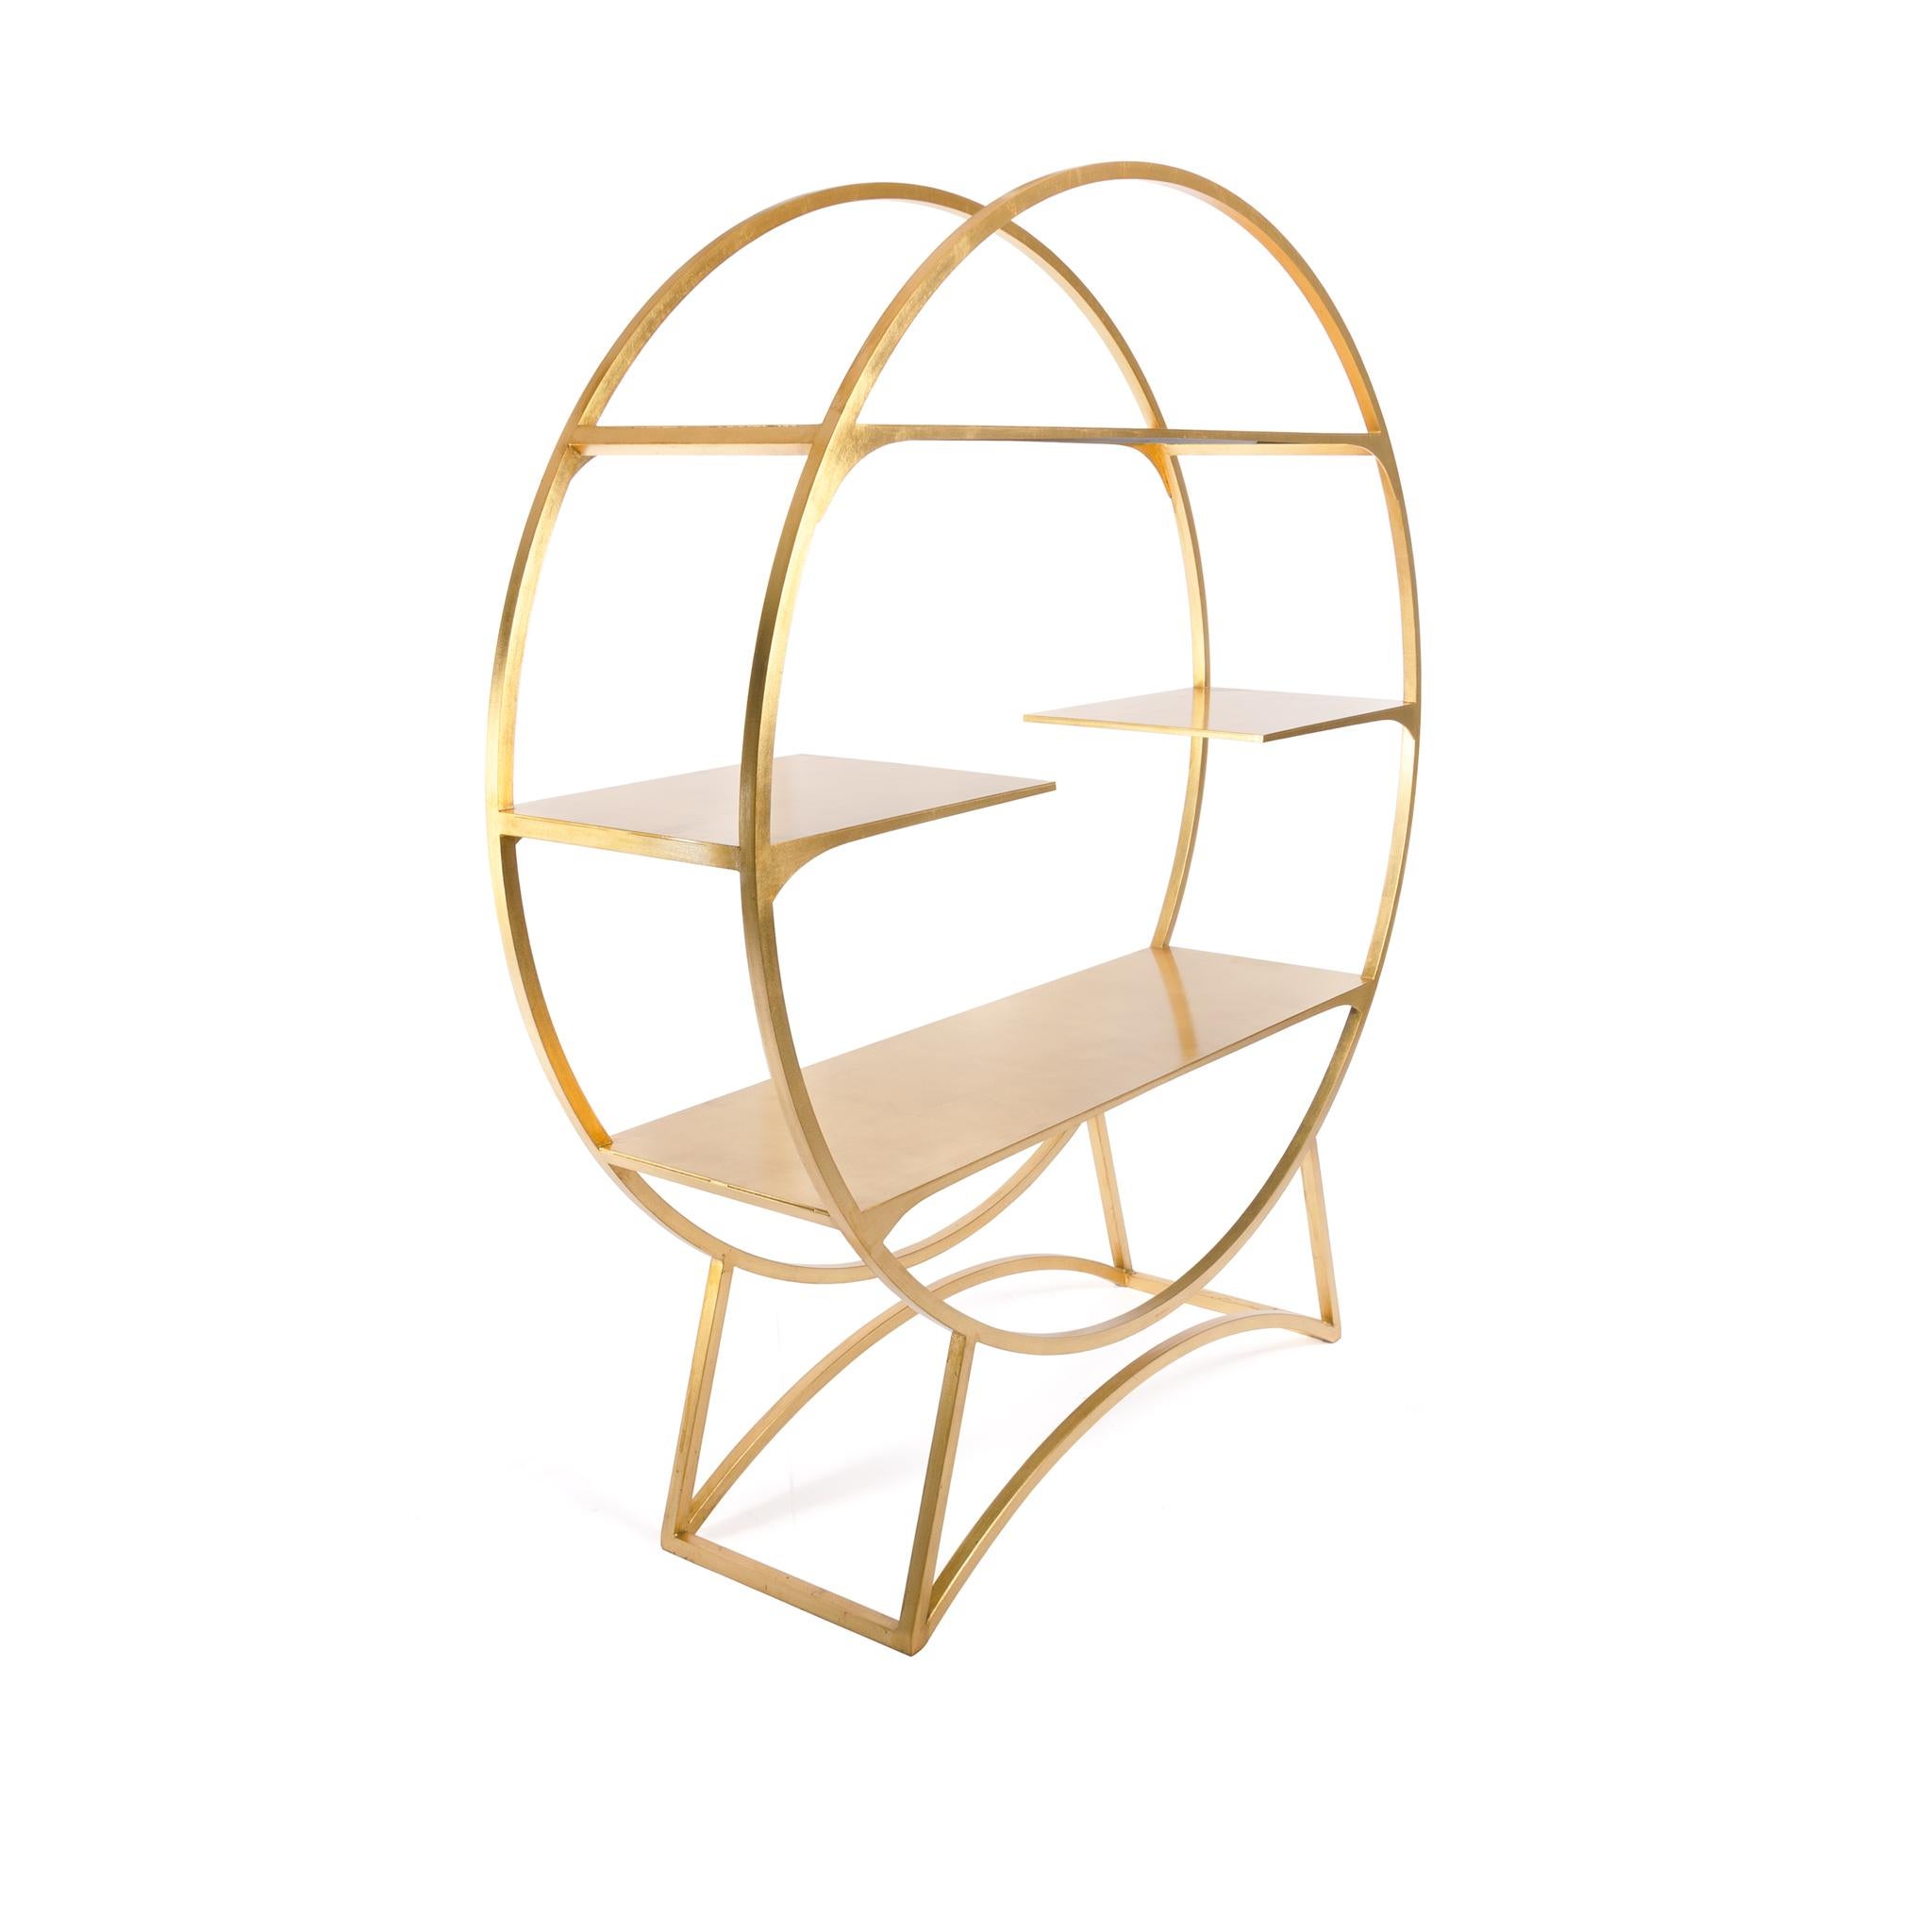 Currently 1 in stock, ready to ship 2-3 days

With its elegant lines and bright golden leaf hand-finish, the Oversized Orb is an eye-catching display piece perfect for showcasing personal item or retail wares. It looks as lovely against a wall as